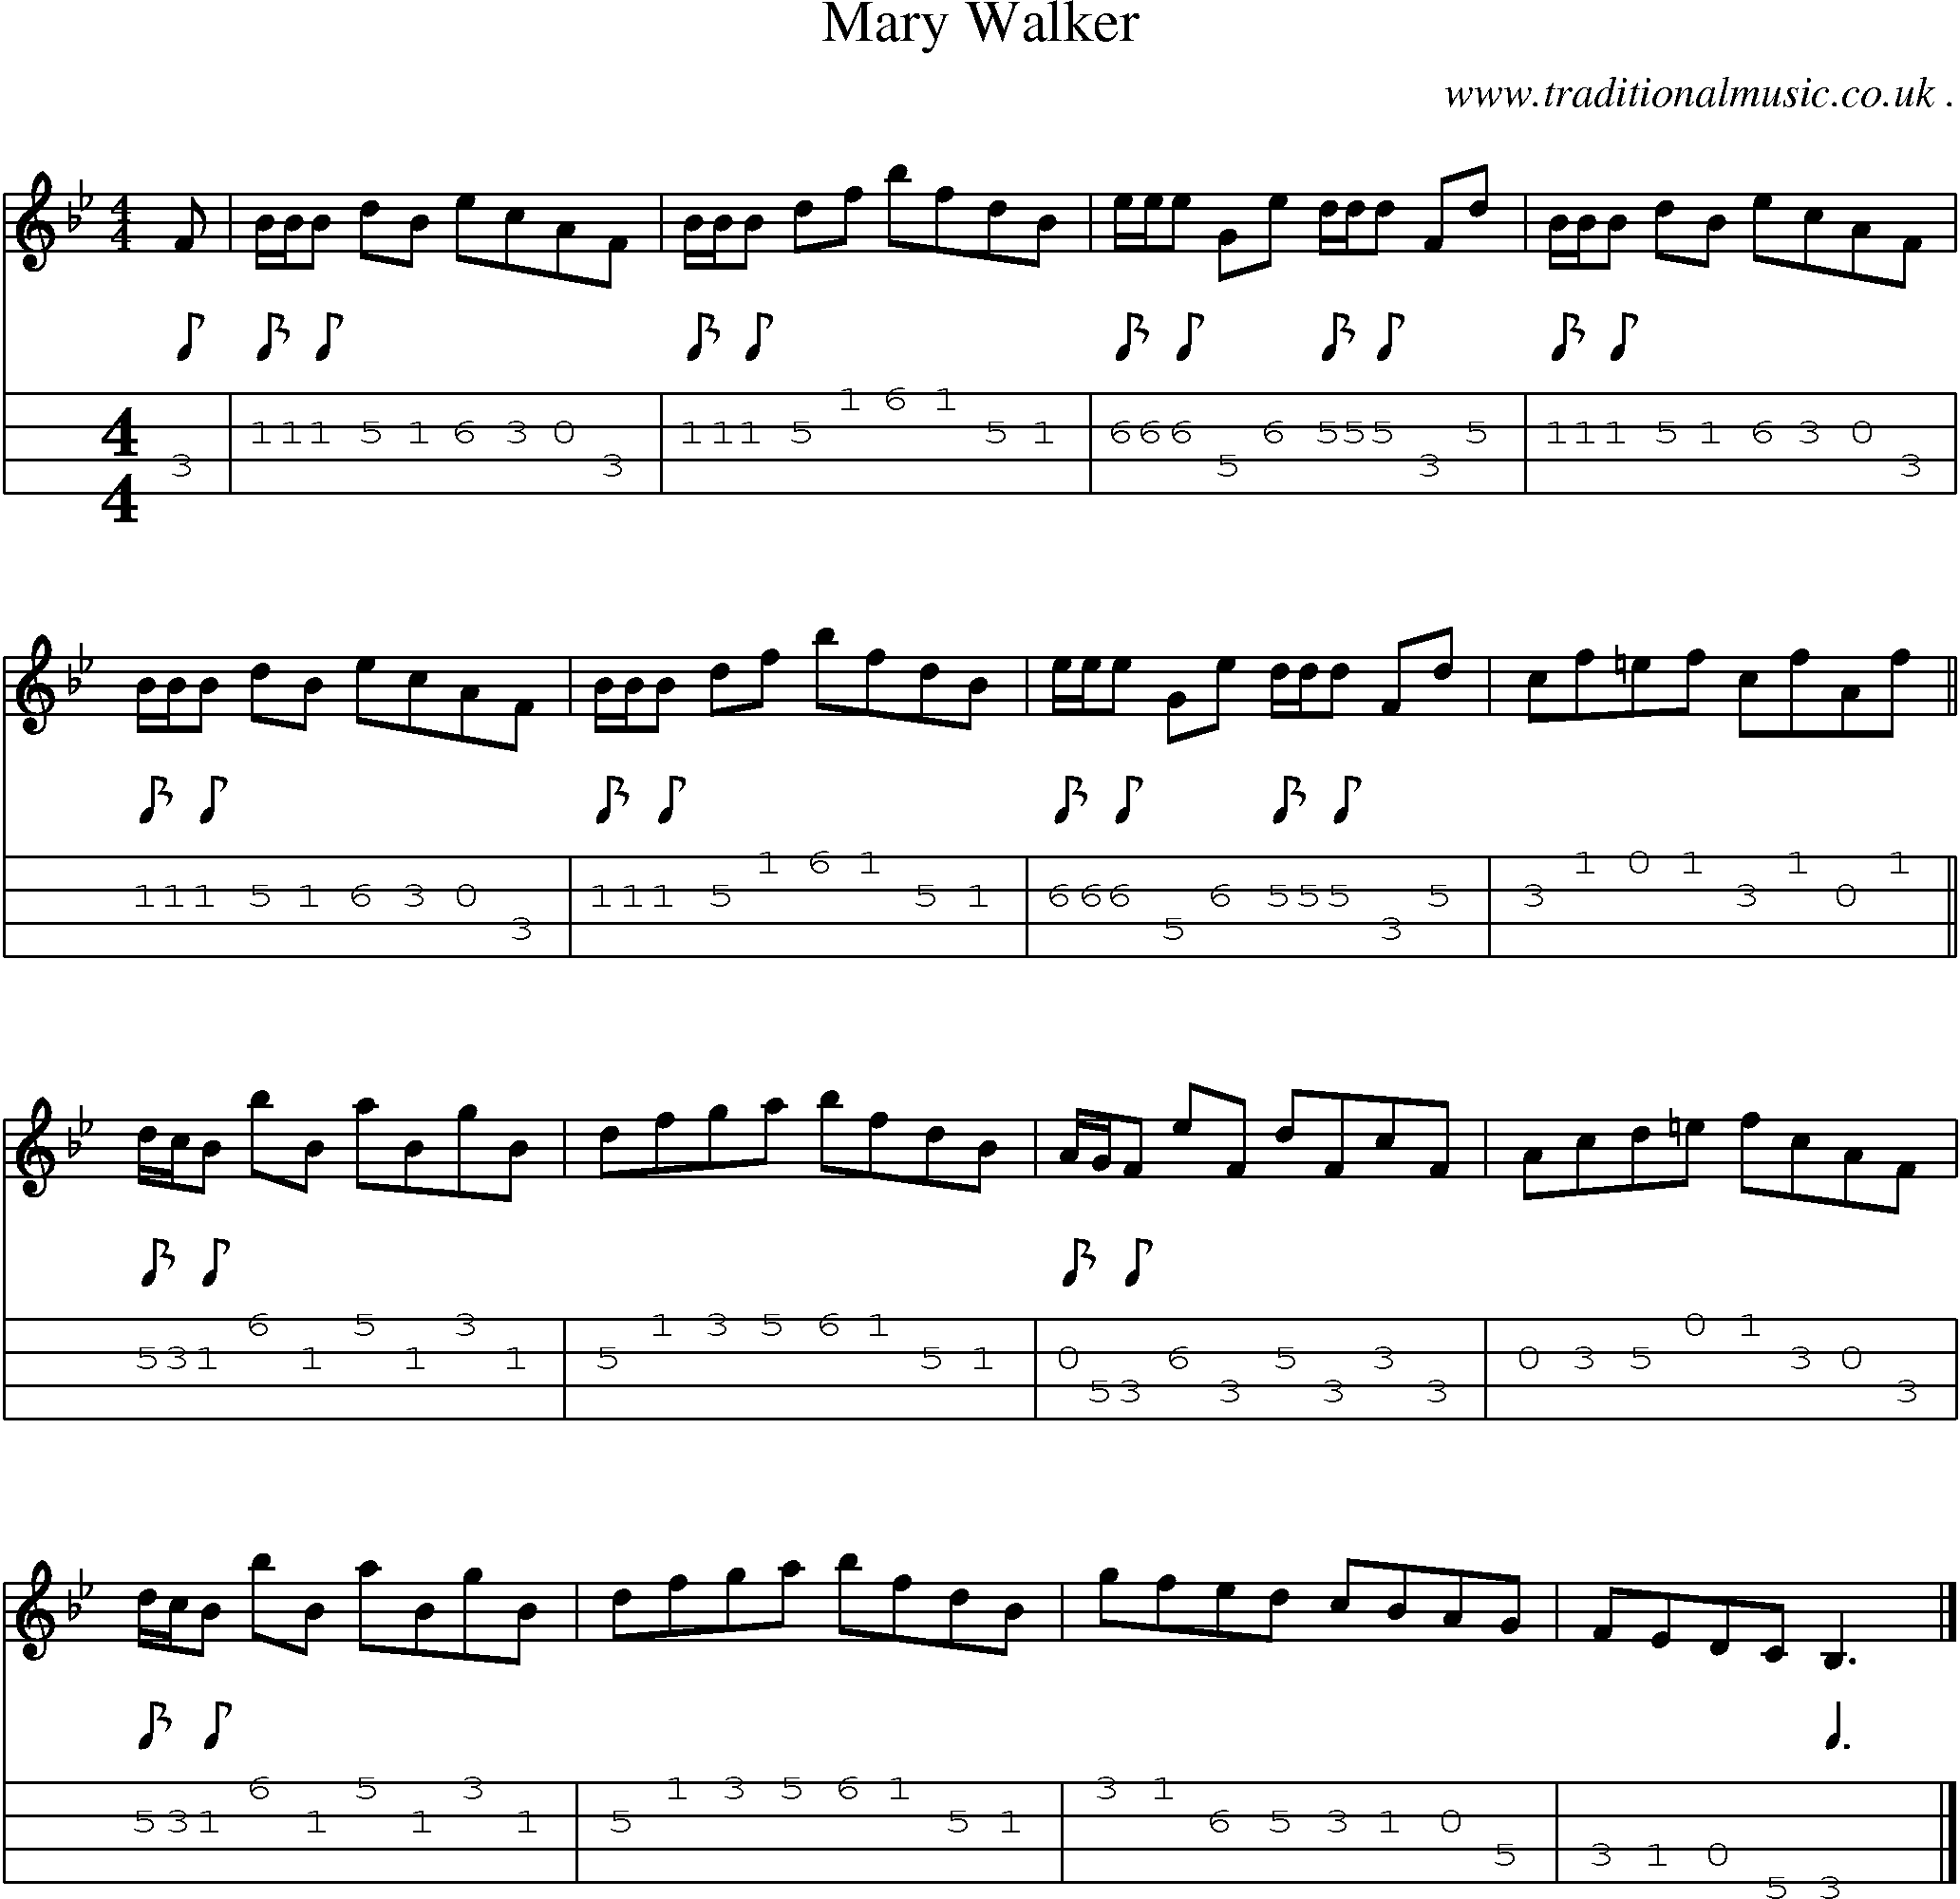 Sheet-music  score, Chords and Mandolin Tabs for Mary Walker